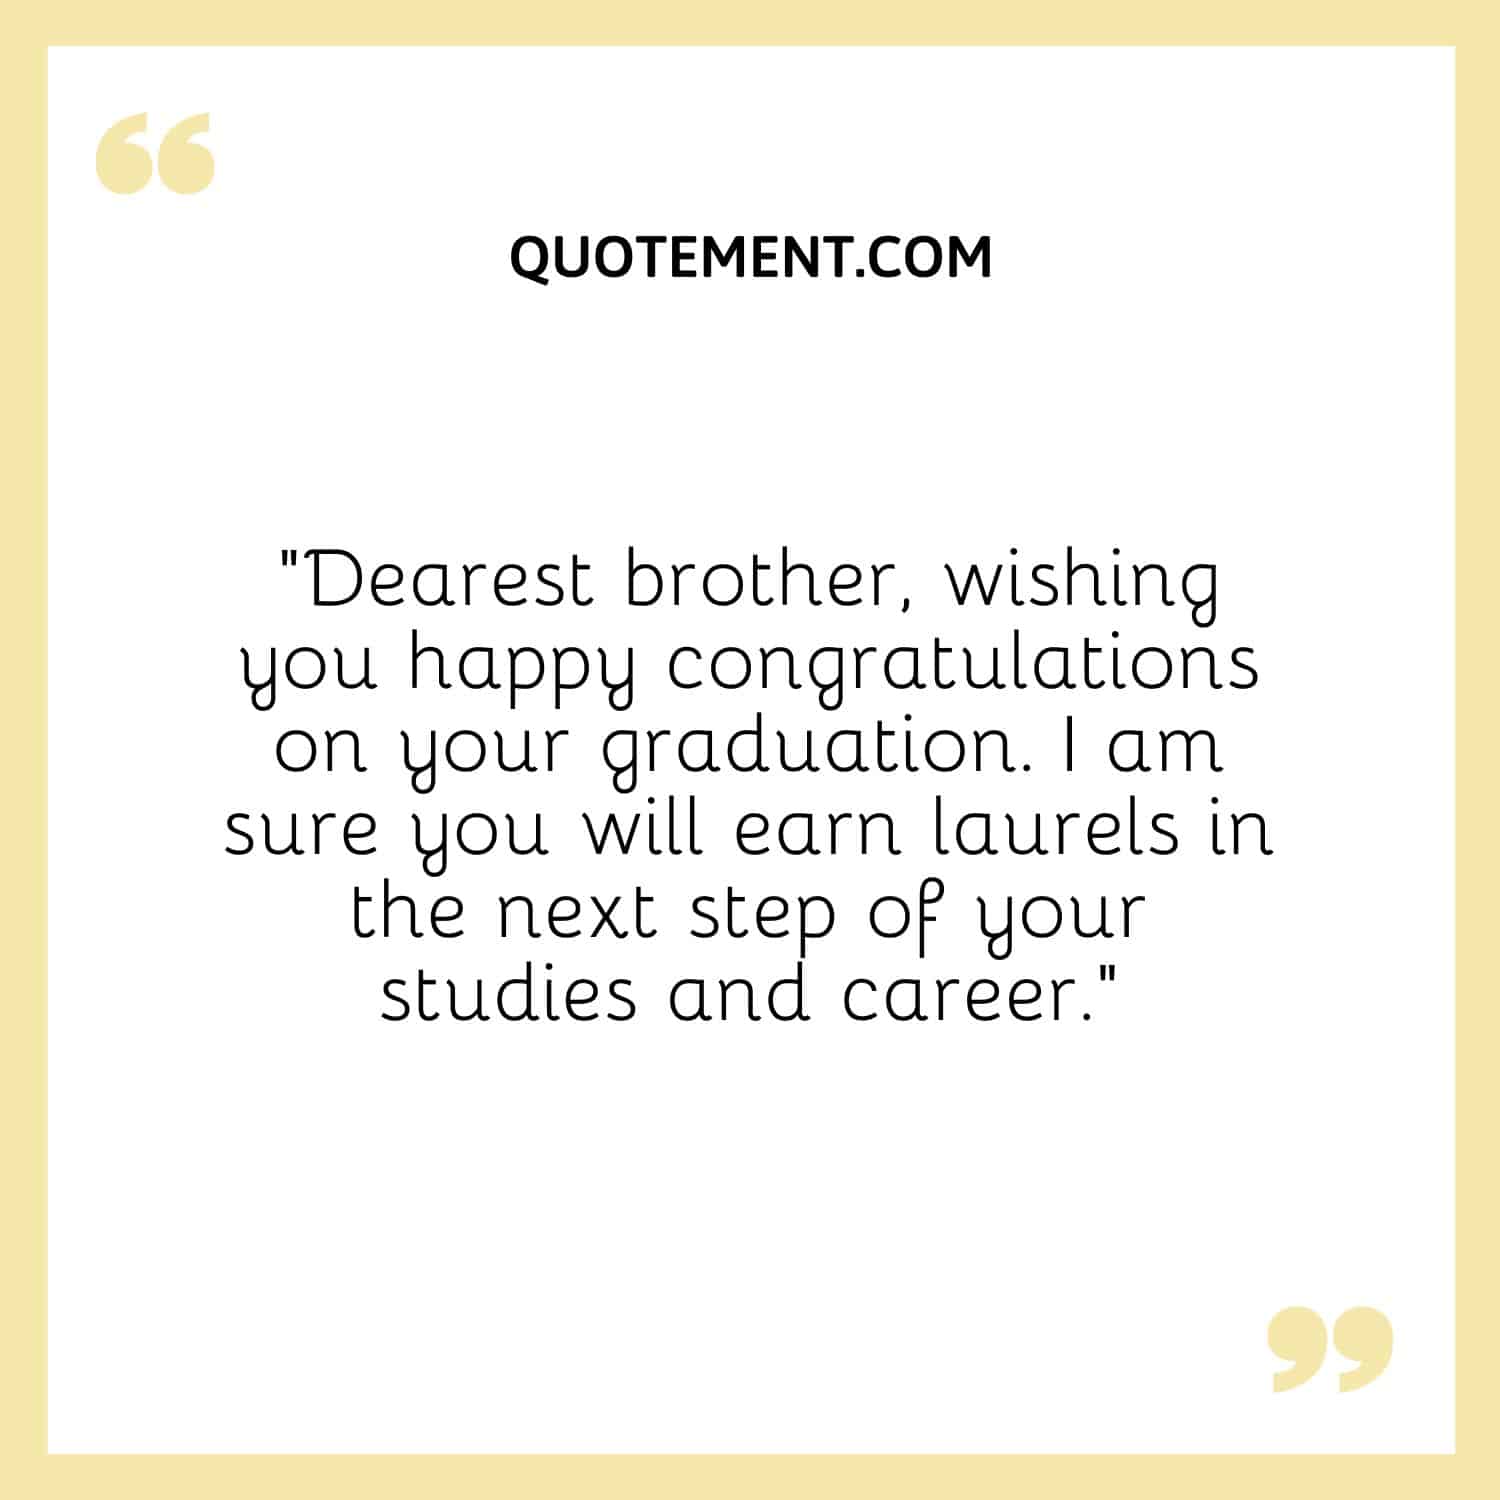 “Dearest brother, wishing you happy congratulations on your graduation. I am sure you will earn laurels in the next step of your studies and career.”